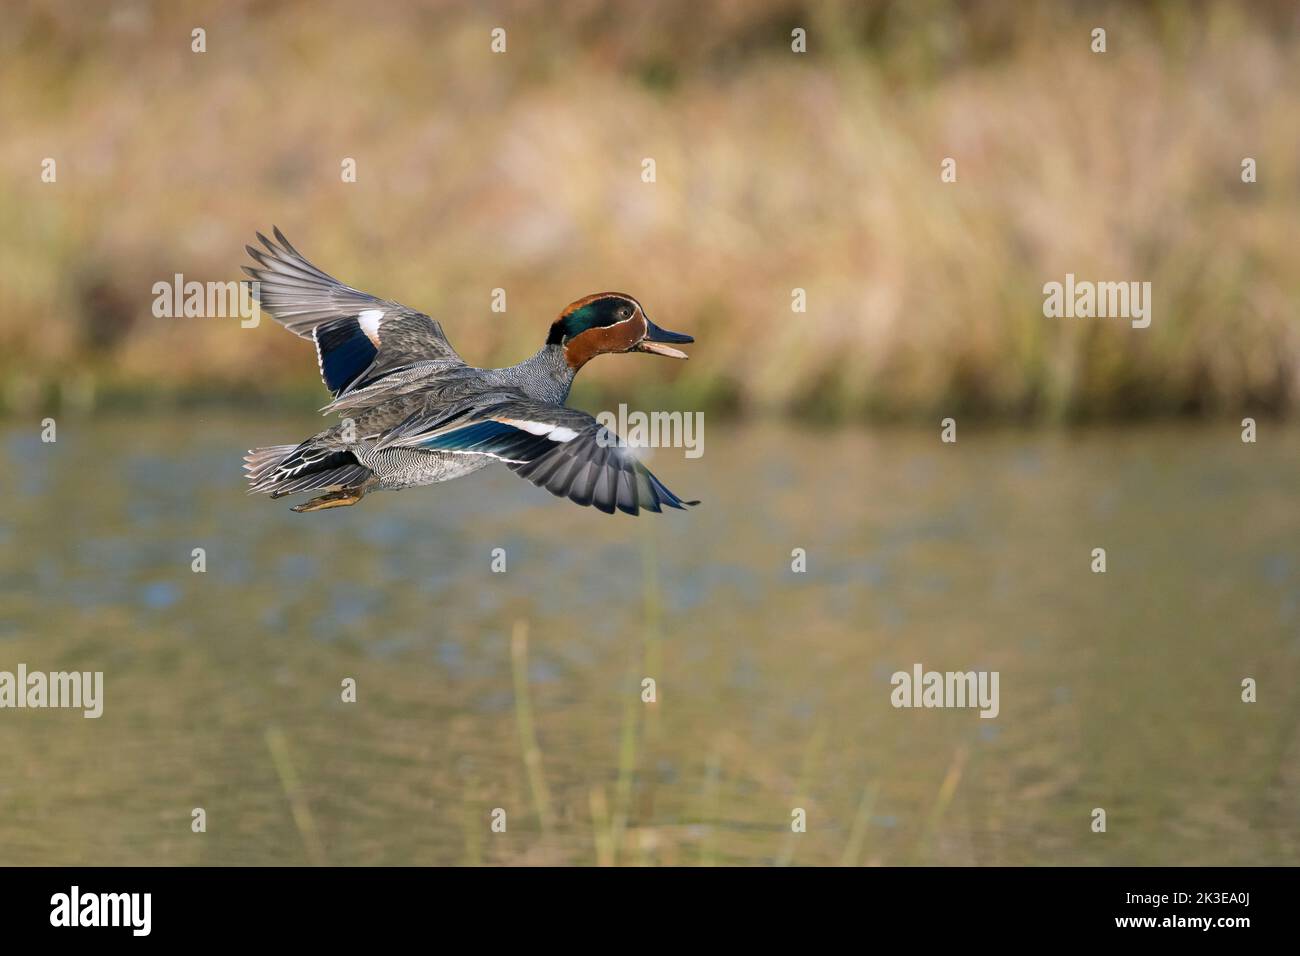 Eurasian teal / common teal / Eurasian green-winged teal (Anas crecca) male / drake in breeding plumage calling while flying over pond in spring Stock Photo